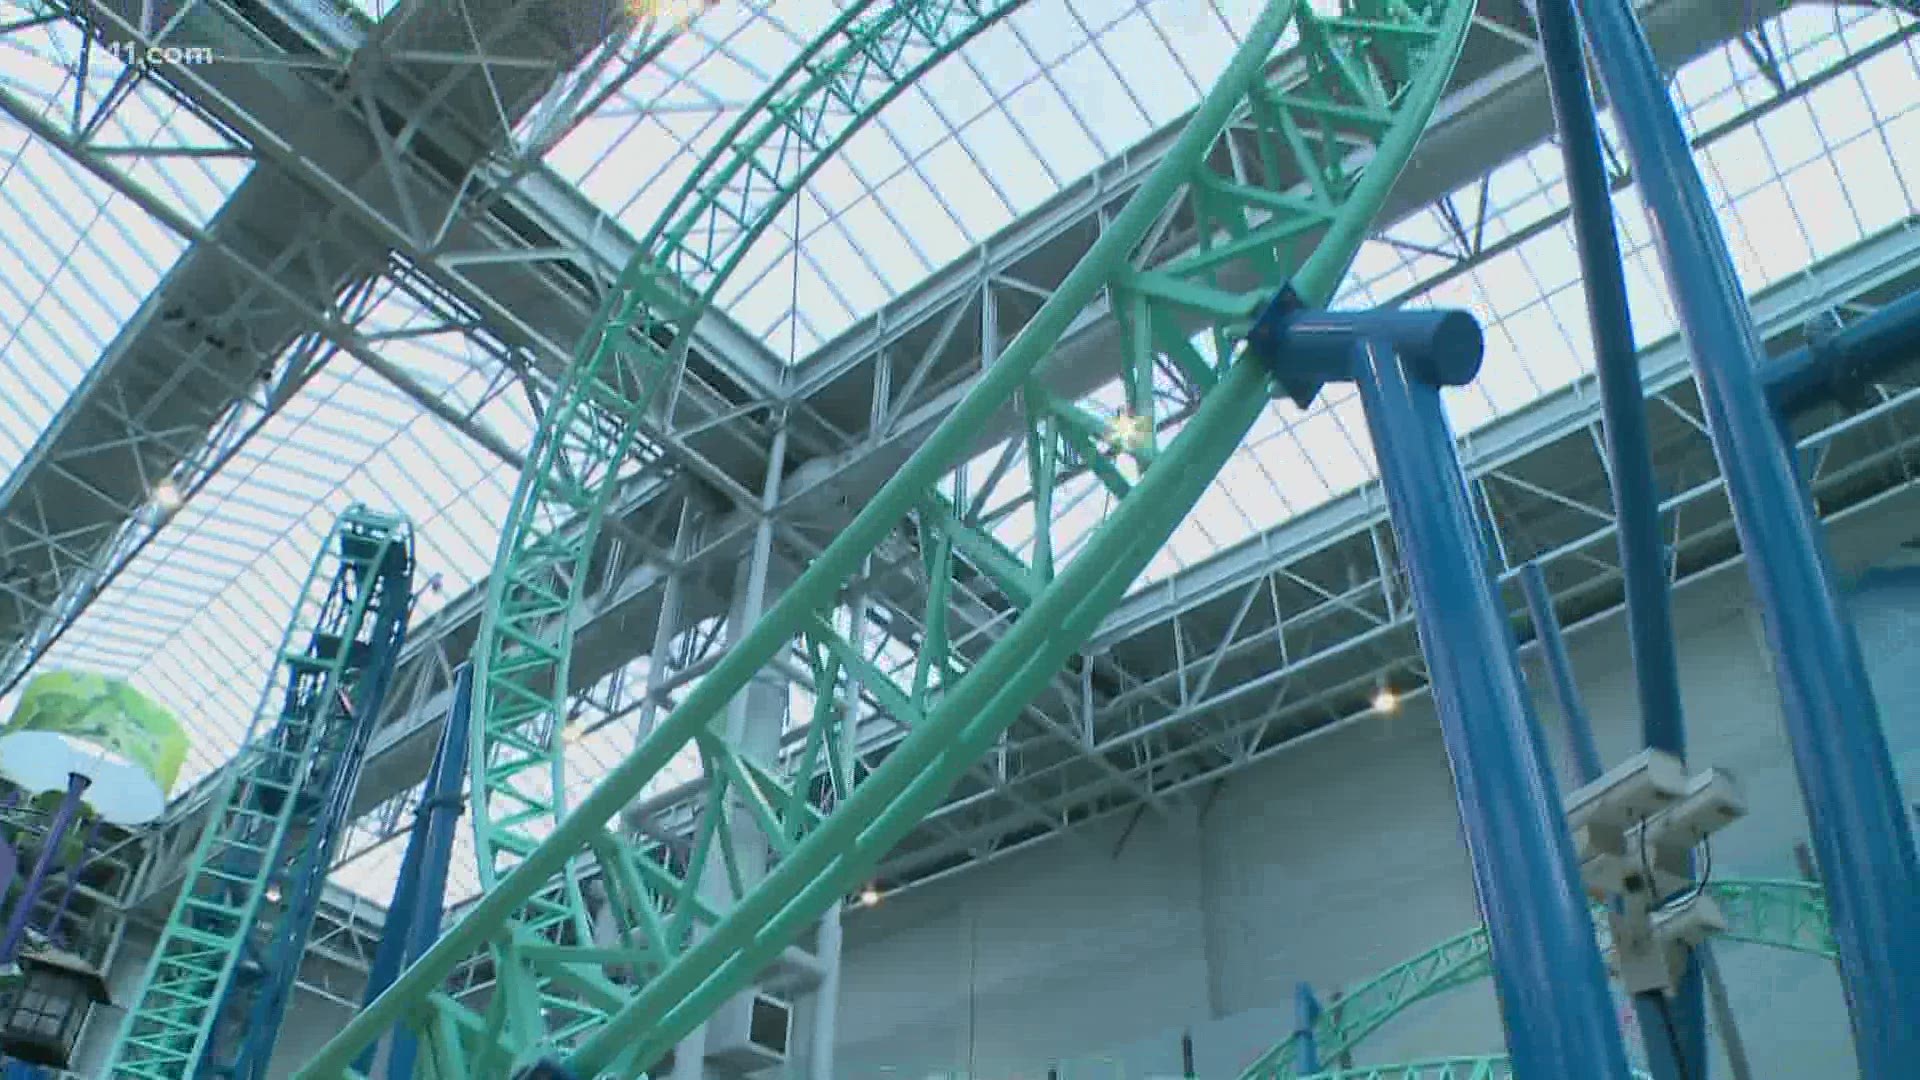 Mall of America's theme park is reopening to the public after a five month closure due to coronavirus.